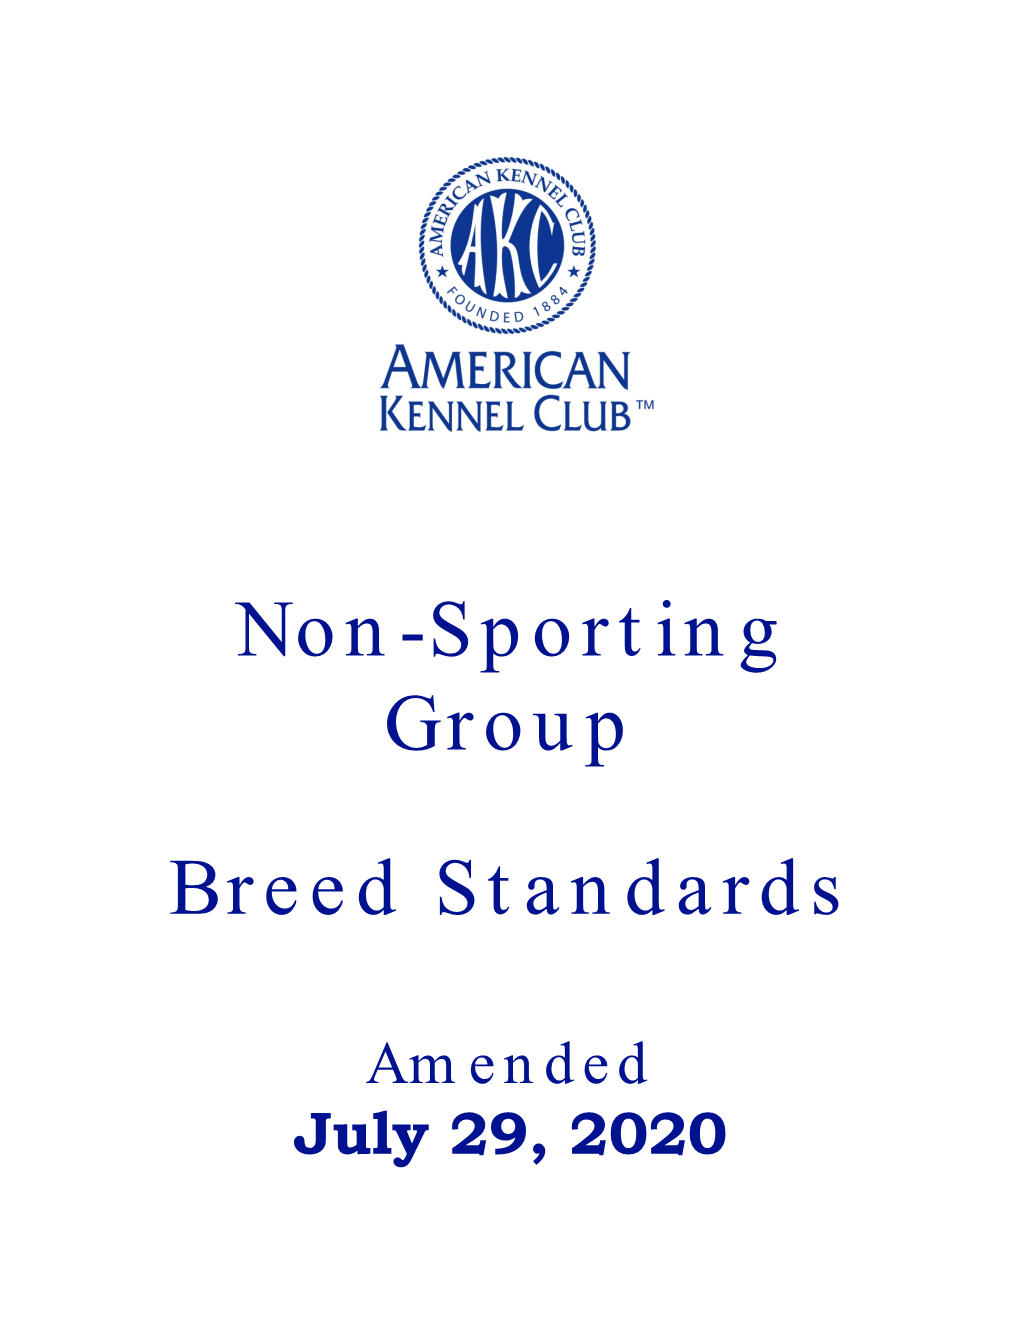 Non-Sporting Group Breed Standards